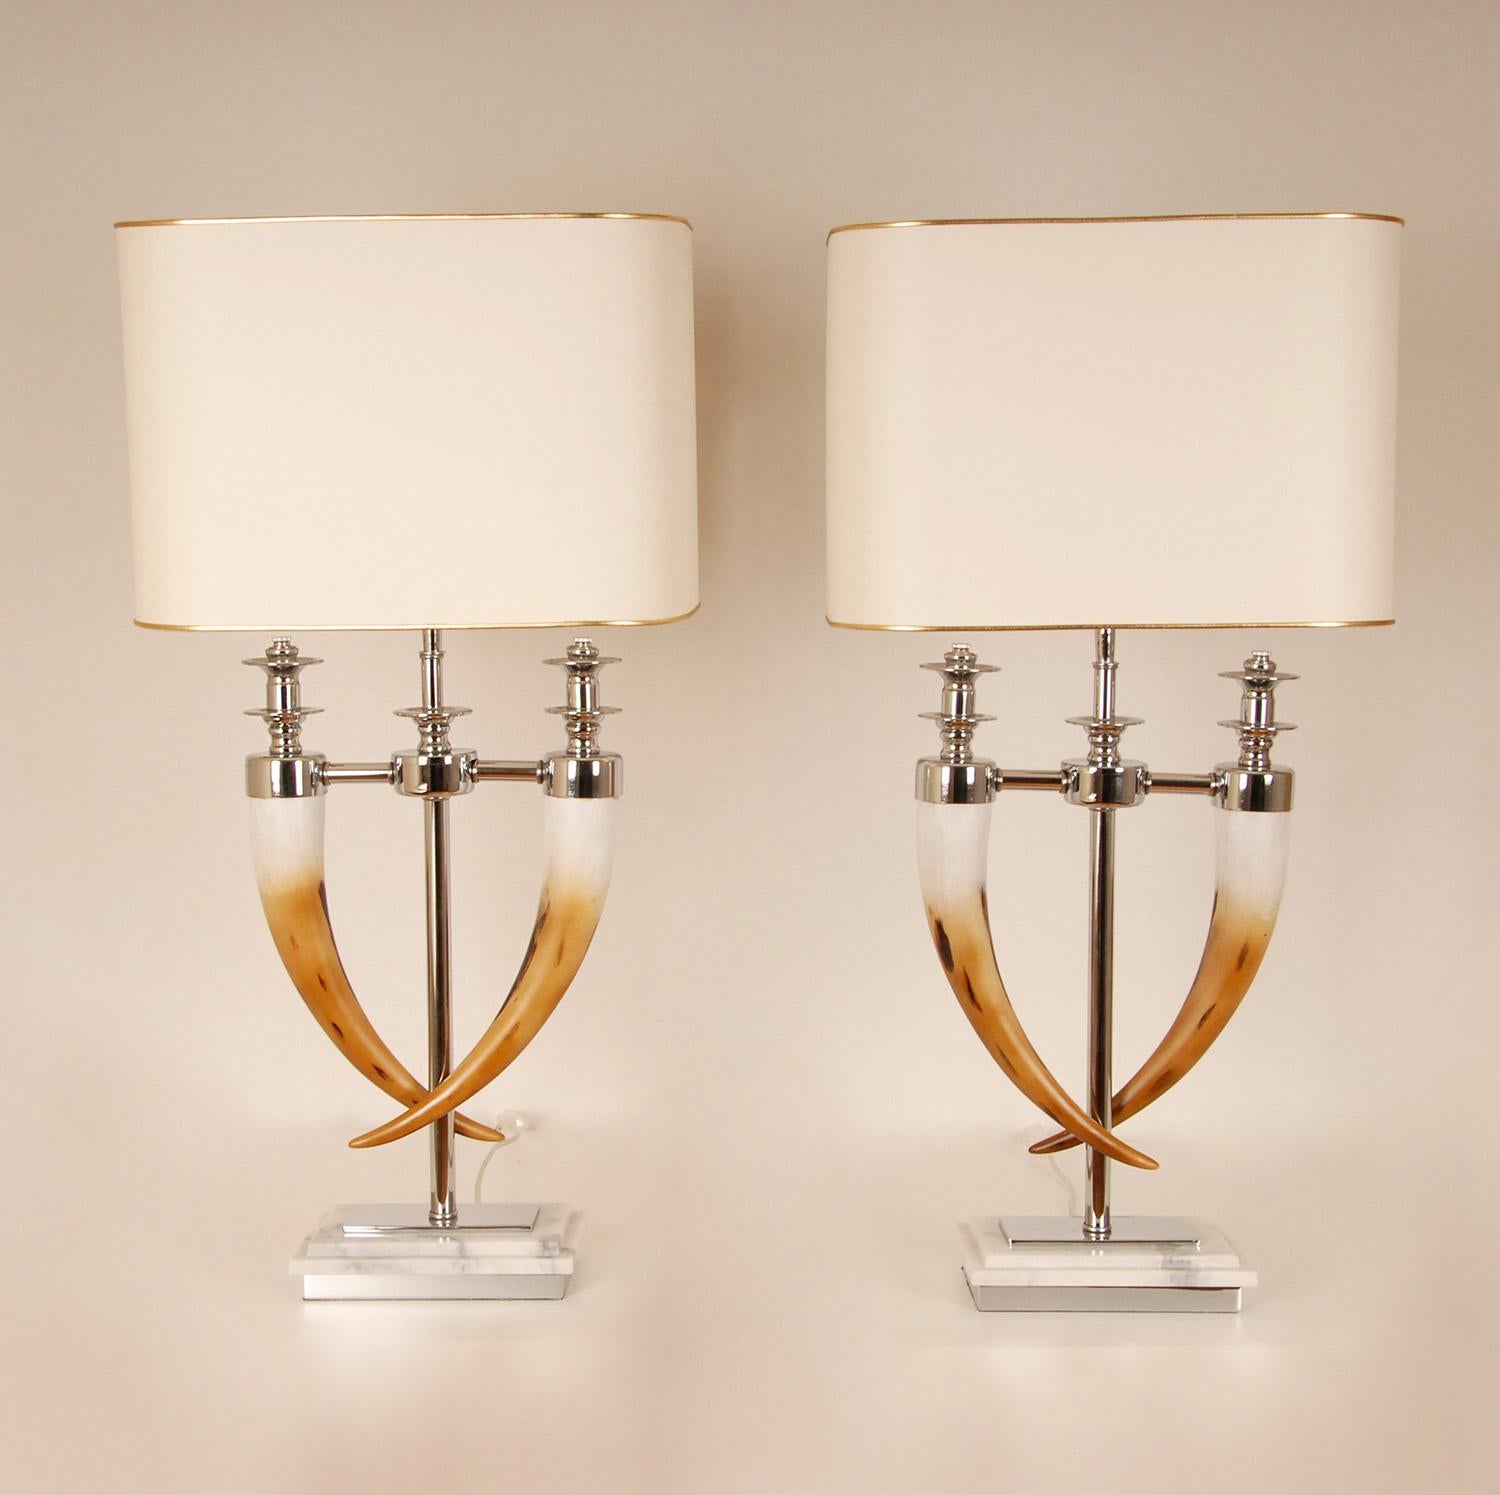 Vintage a pair modern table lamps
Made of chrome, 2 faux horns on a marble base
With gold/off white matching lampshades ( new condition )
Style:  Country style, Modern , American, Vintage
Design: In the manner of Chapman manufacturng company,